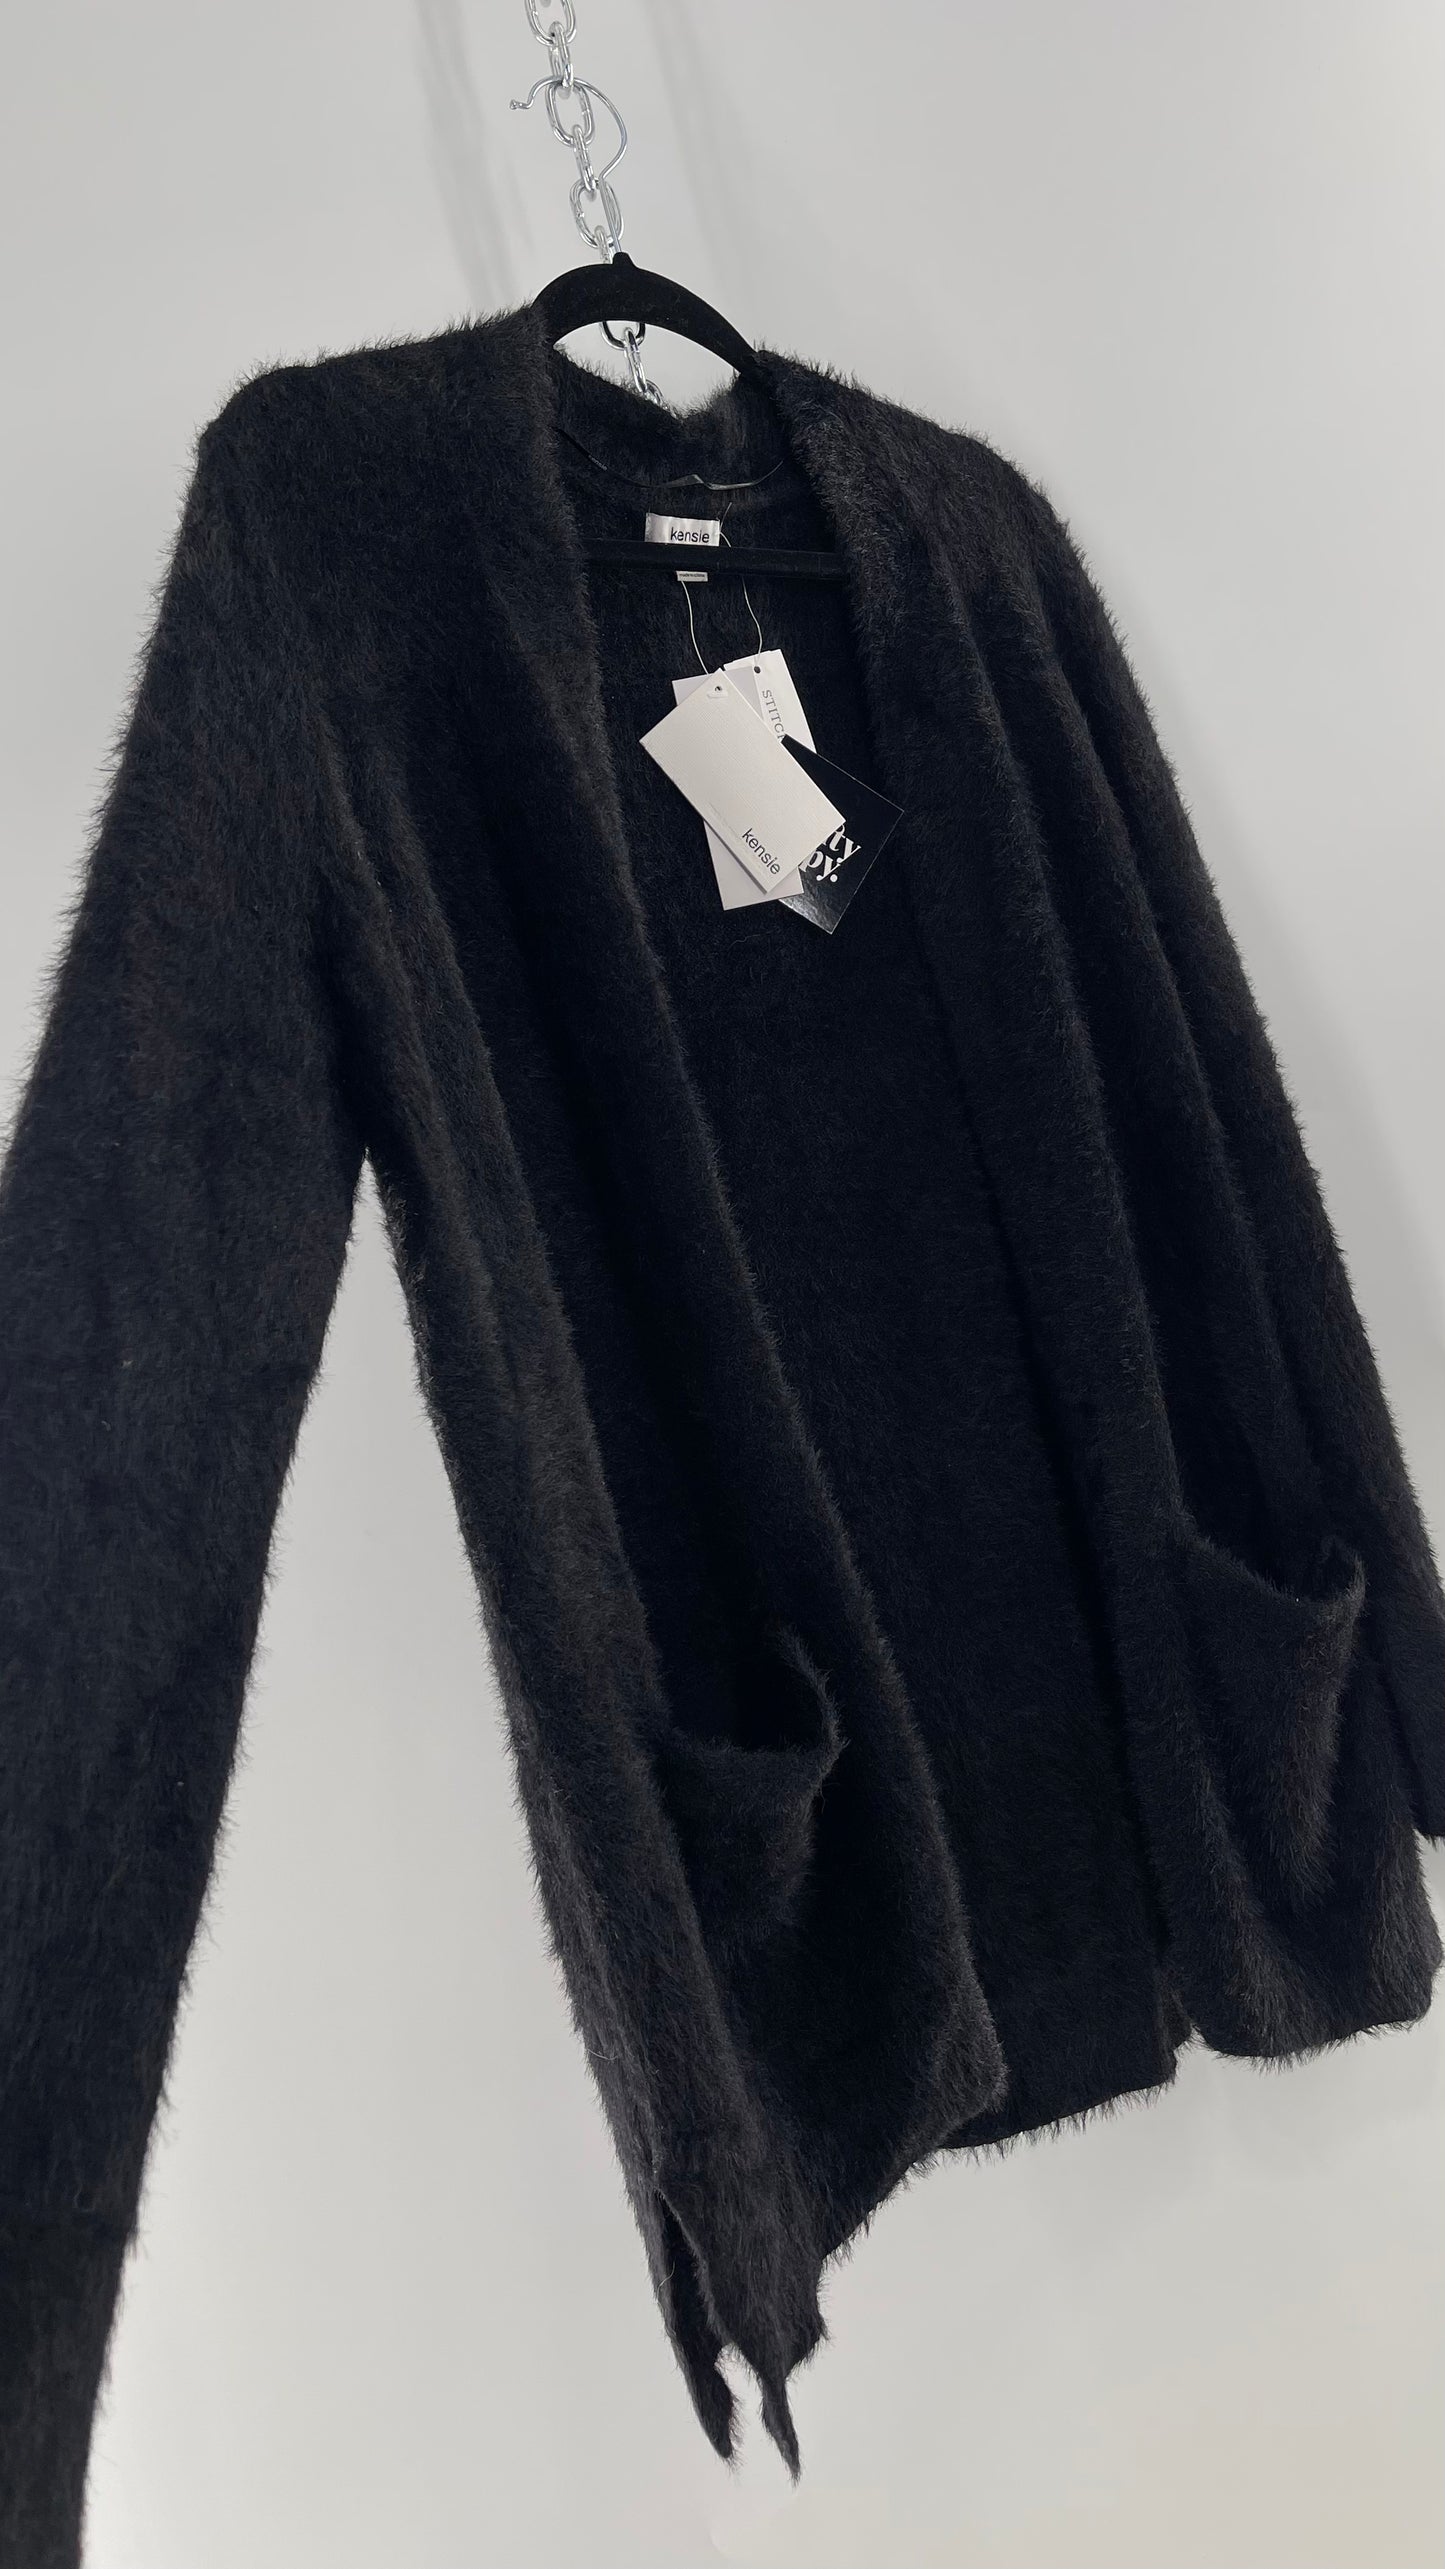 Kensie Black Fuzzy Slouchy Cardigan with Pockets and Tags Attached (Small)